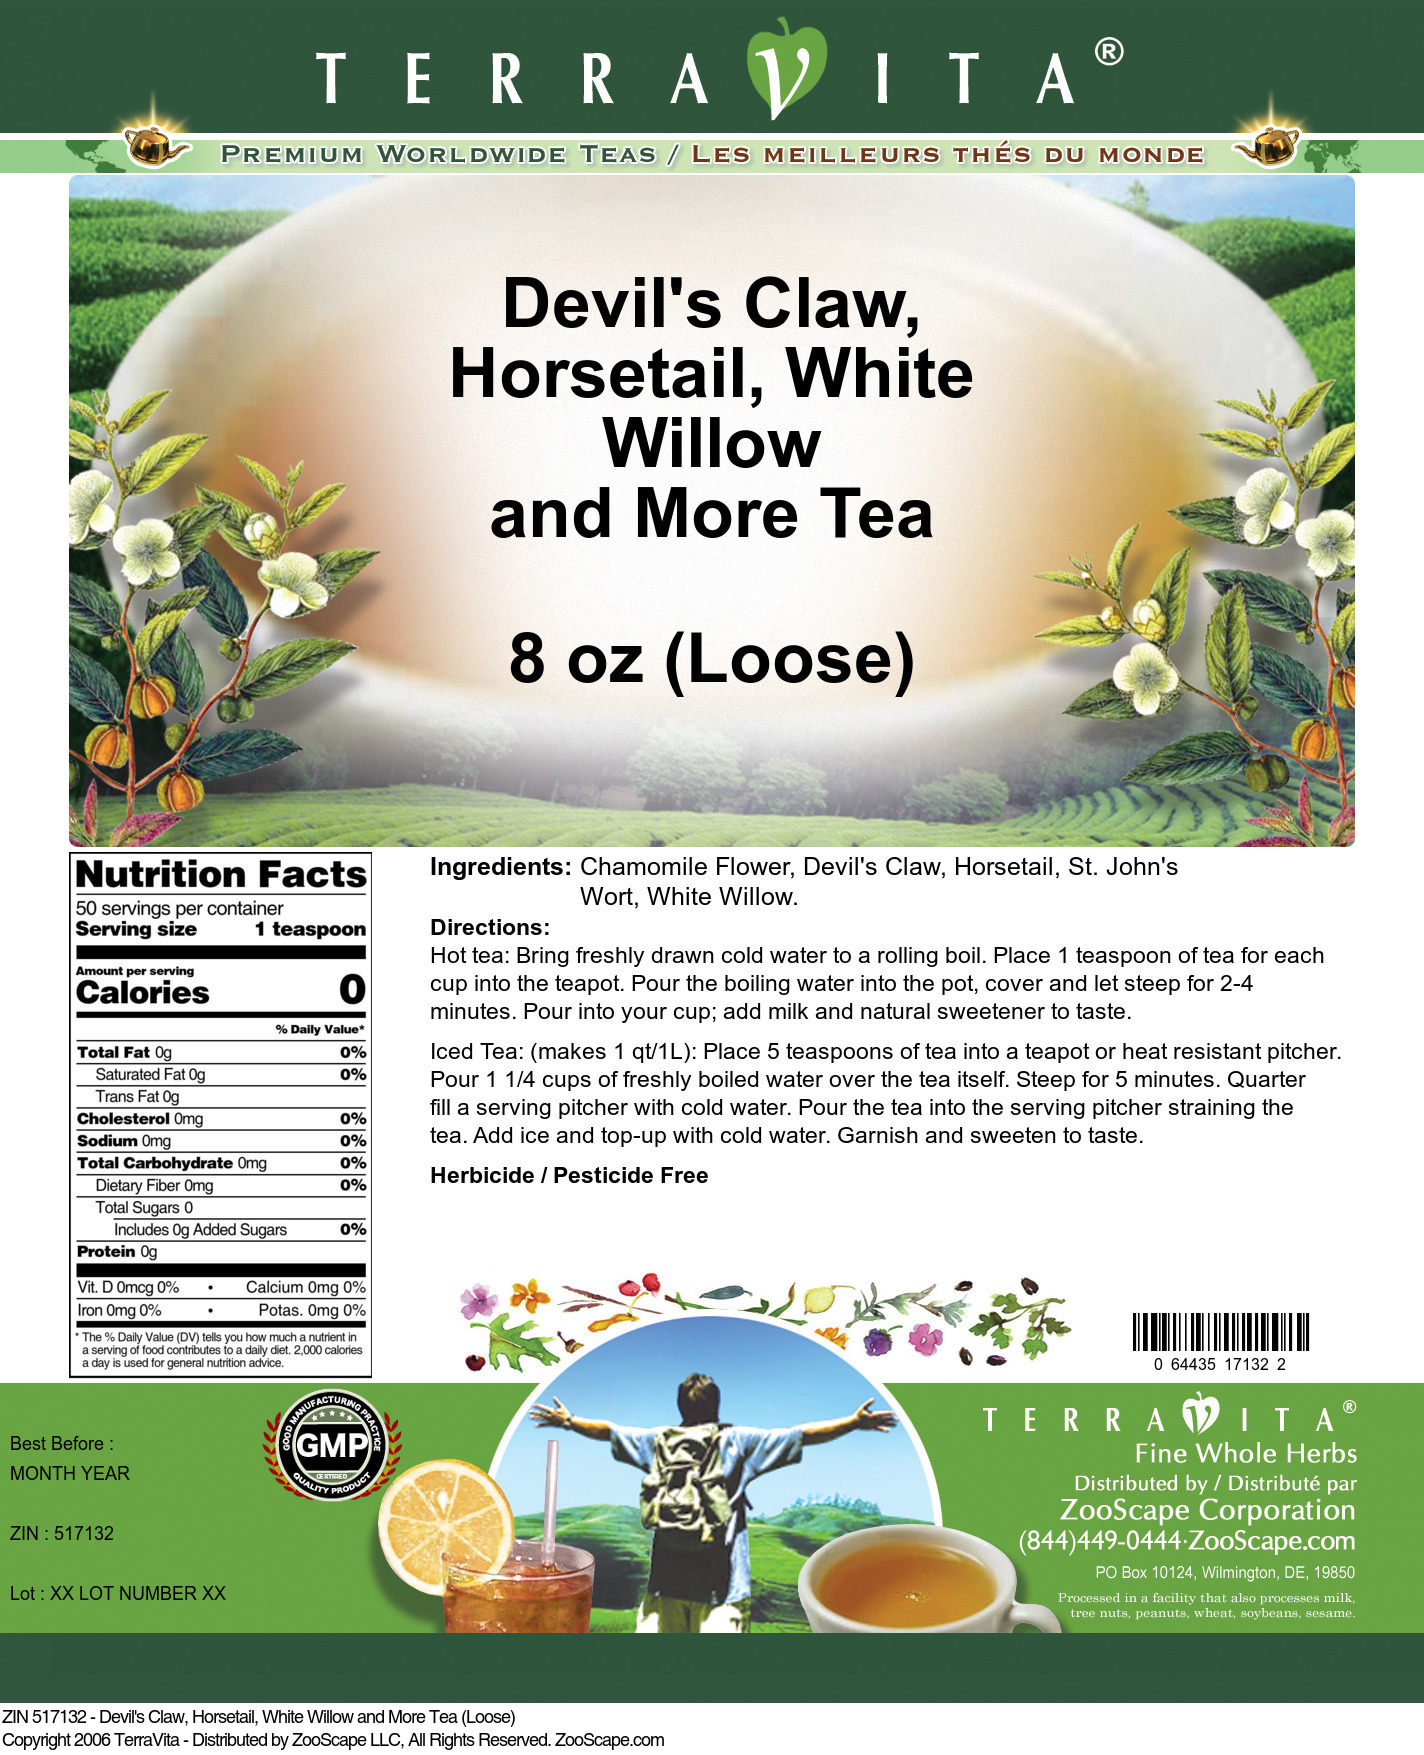 Devil's Claw, Horsetail, White Willow and More Tea (Loose) - Label